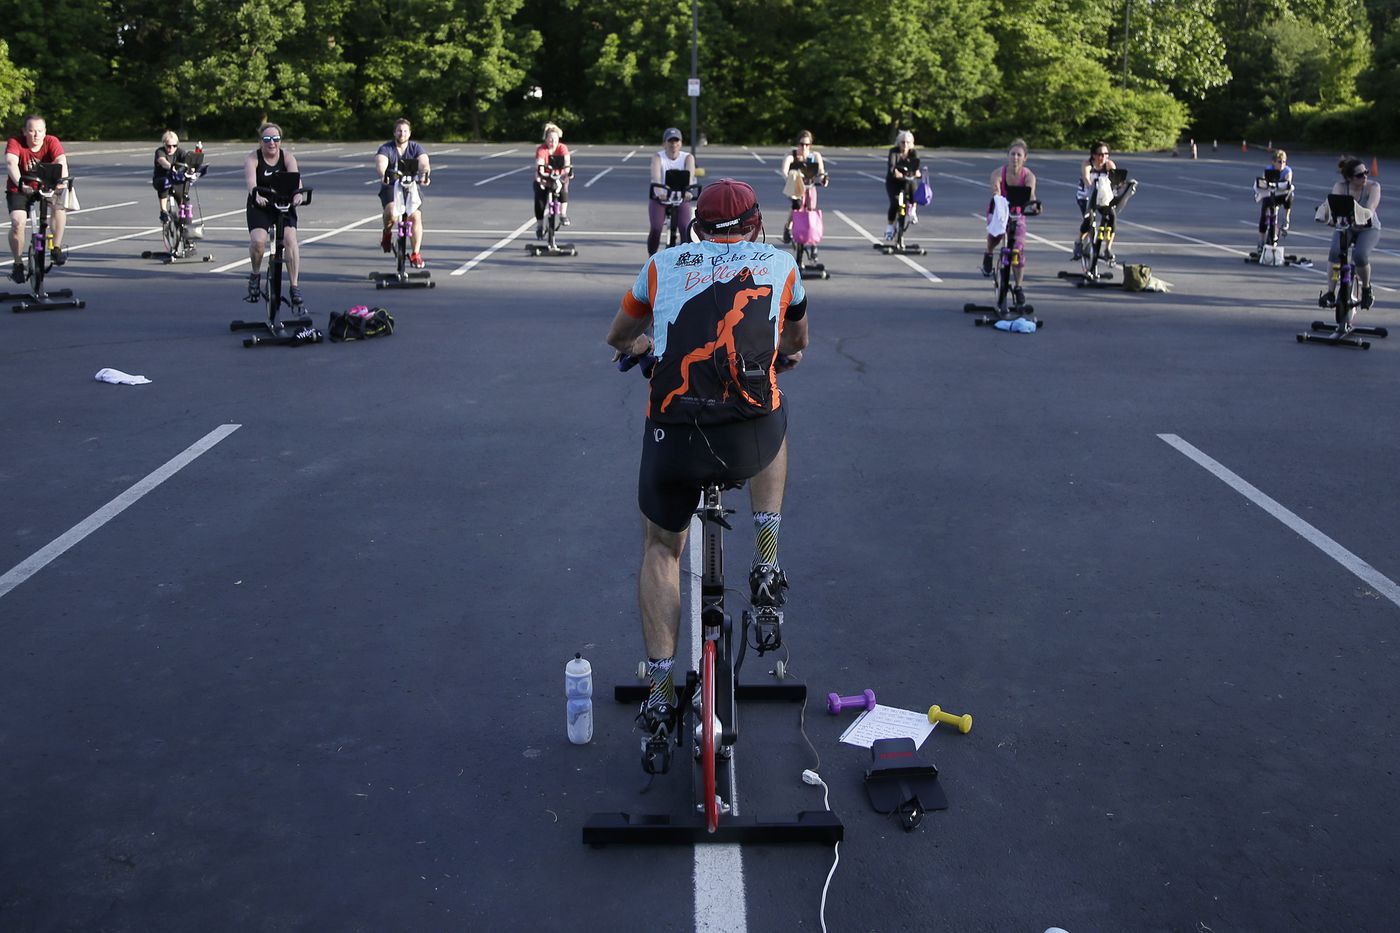 Cycling instructor Tom Hambrose (foreground) leads the 45 minute “Cycling with Tom” spin class in the parking lot at Royal Fitness in Barrington, N.J. on May 27, 2020. Gyms in New Jersey can hold outdoor classes, with restrictions, but indoor use has not been authorized yet.